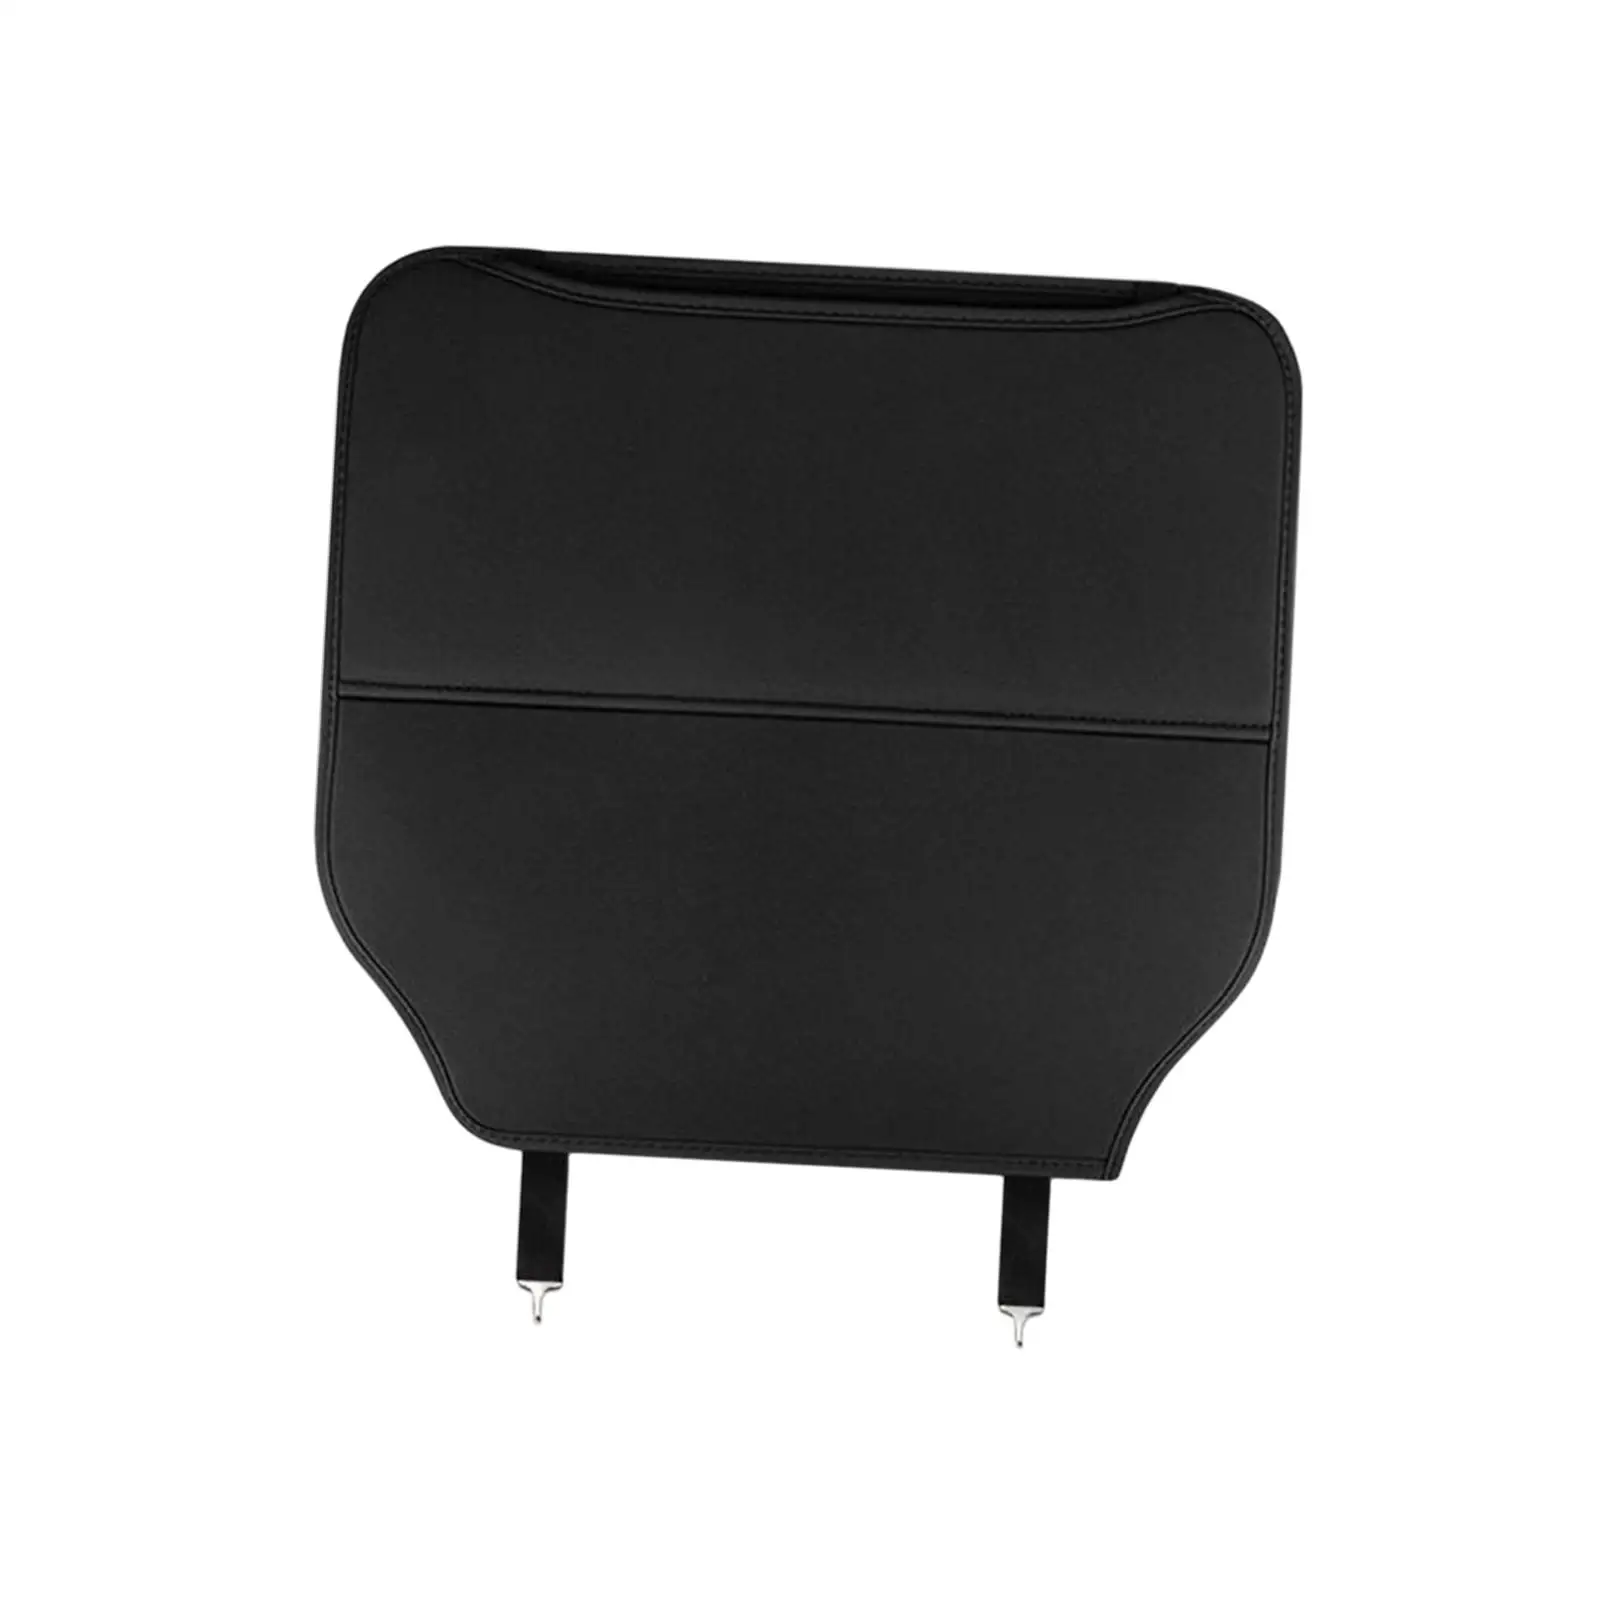 Car Back Seat Protector Kick Pad Replaces Backseat Protector Cover for Byd Atto 3 Yuan Plus